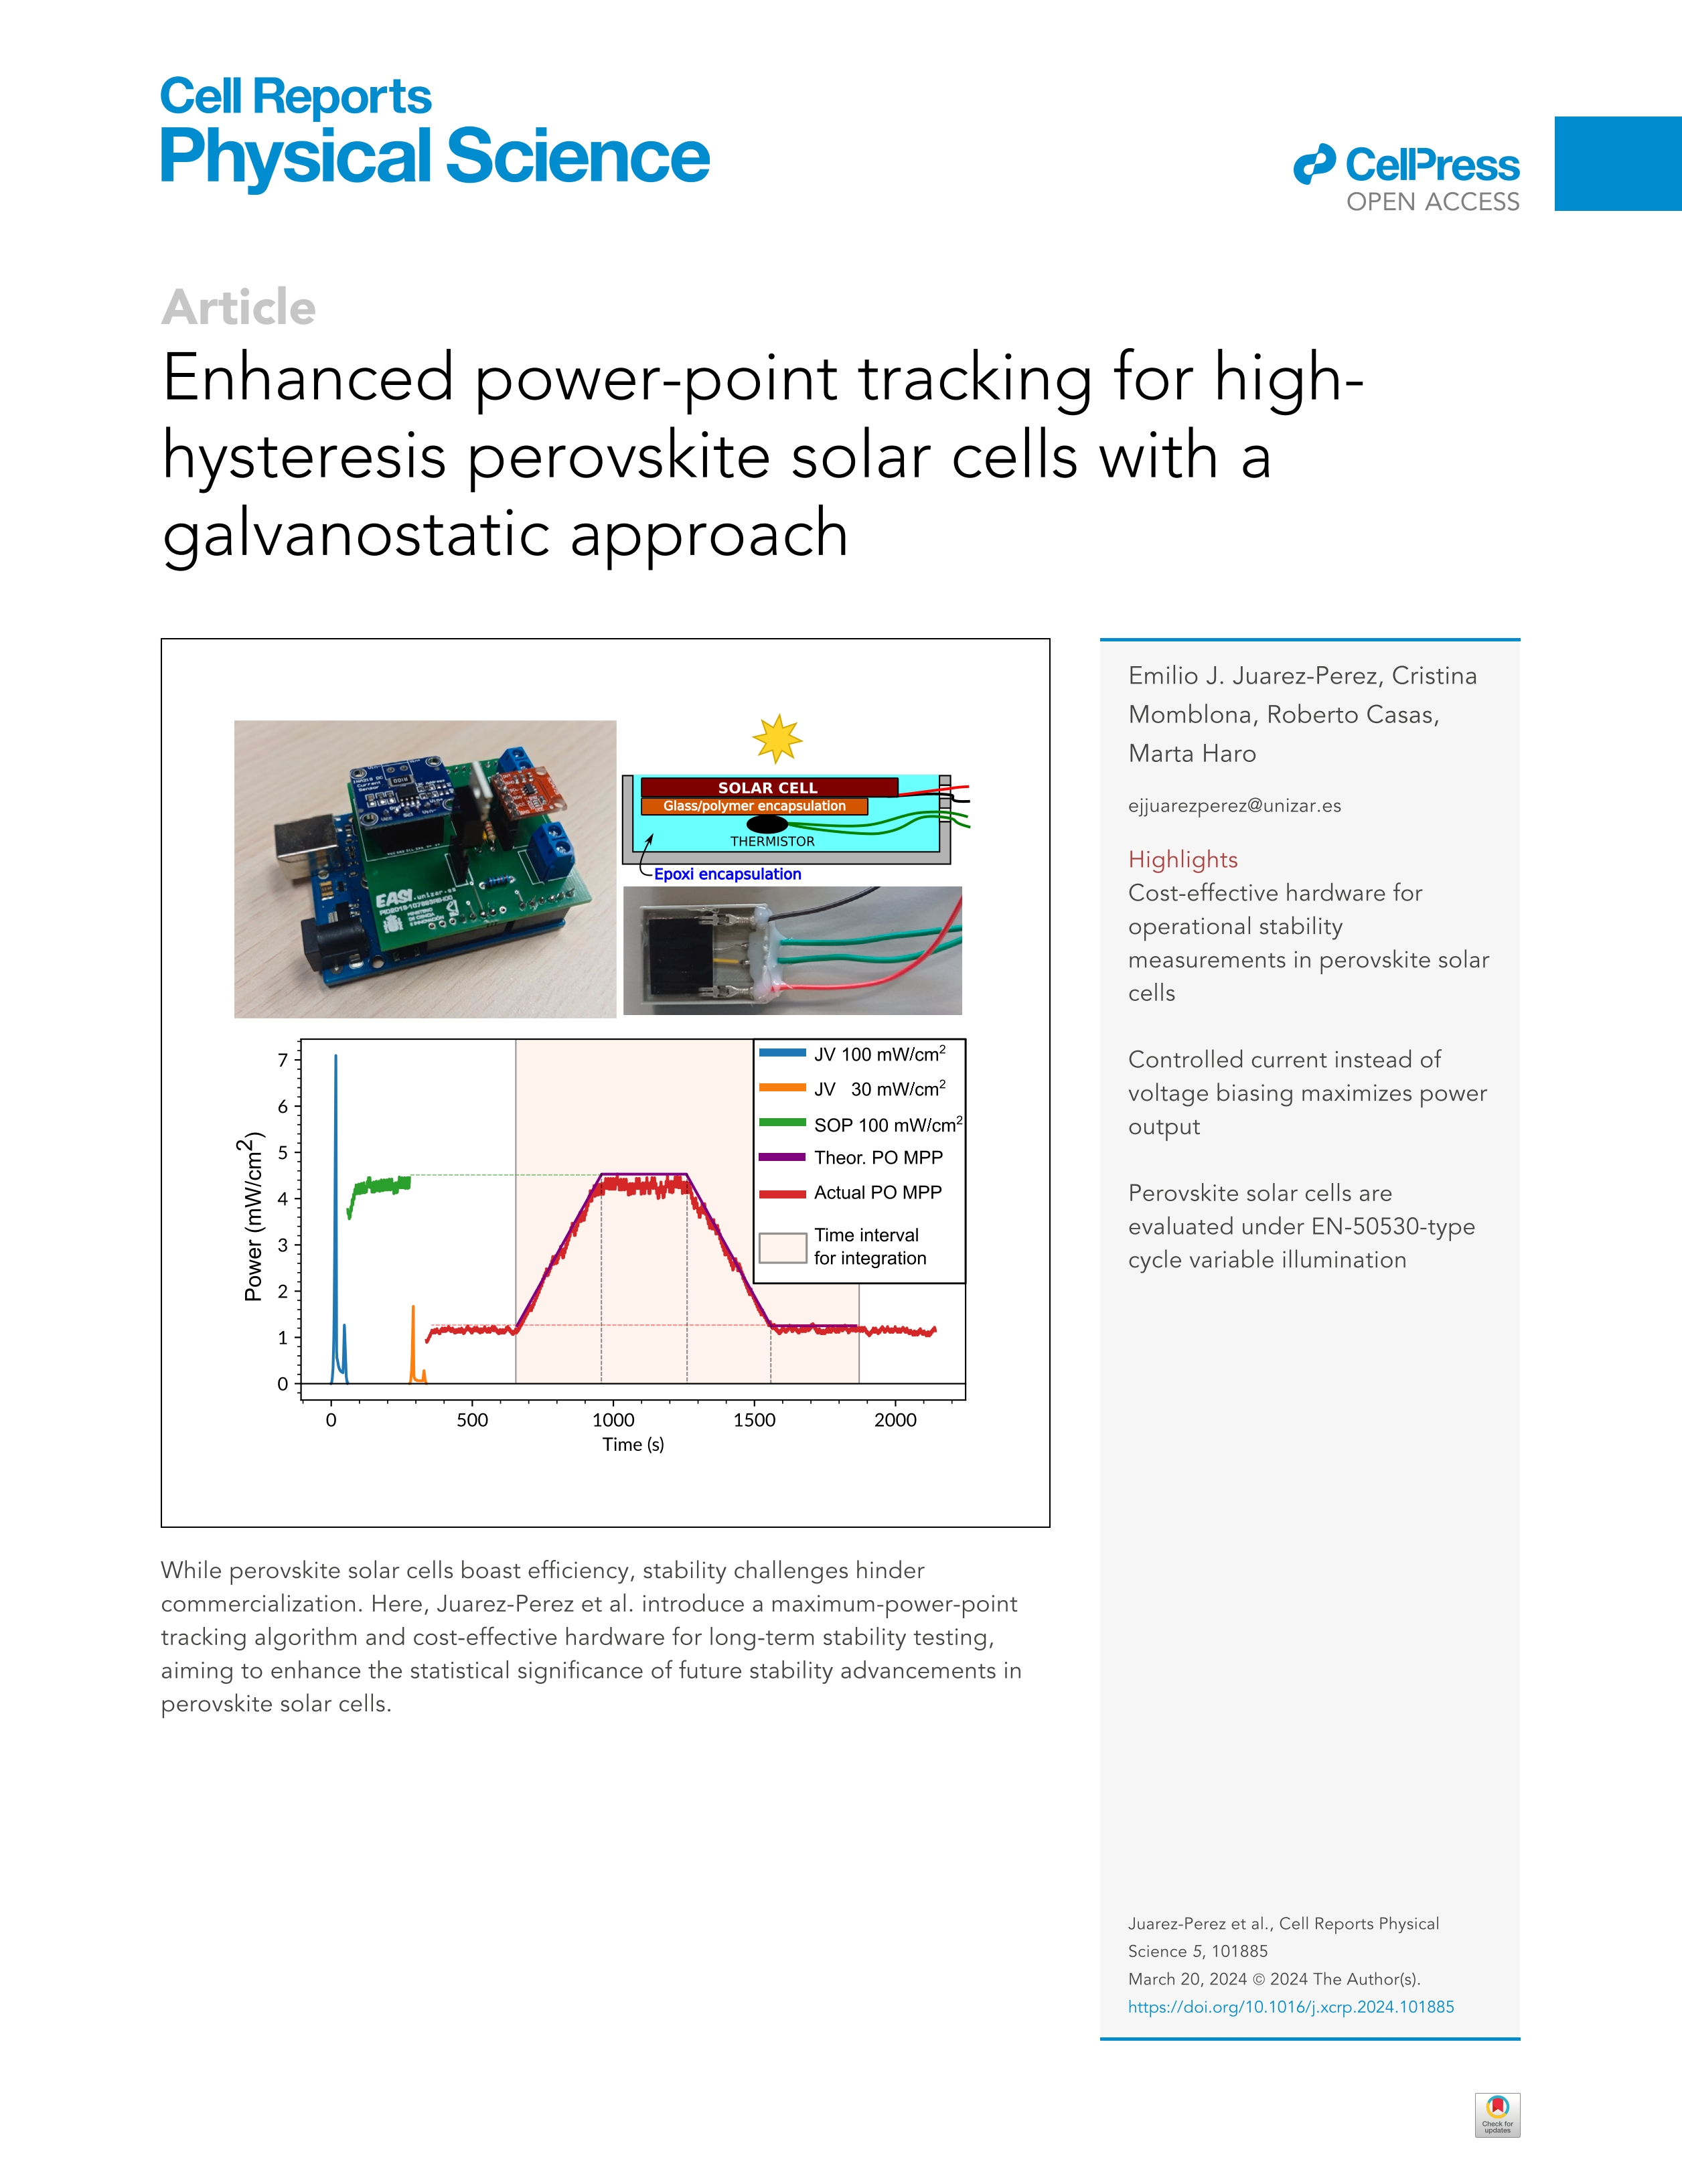 Enhanced power-point tracking for high-hysteresis perovskite solar cells with a galvanostatic approach